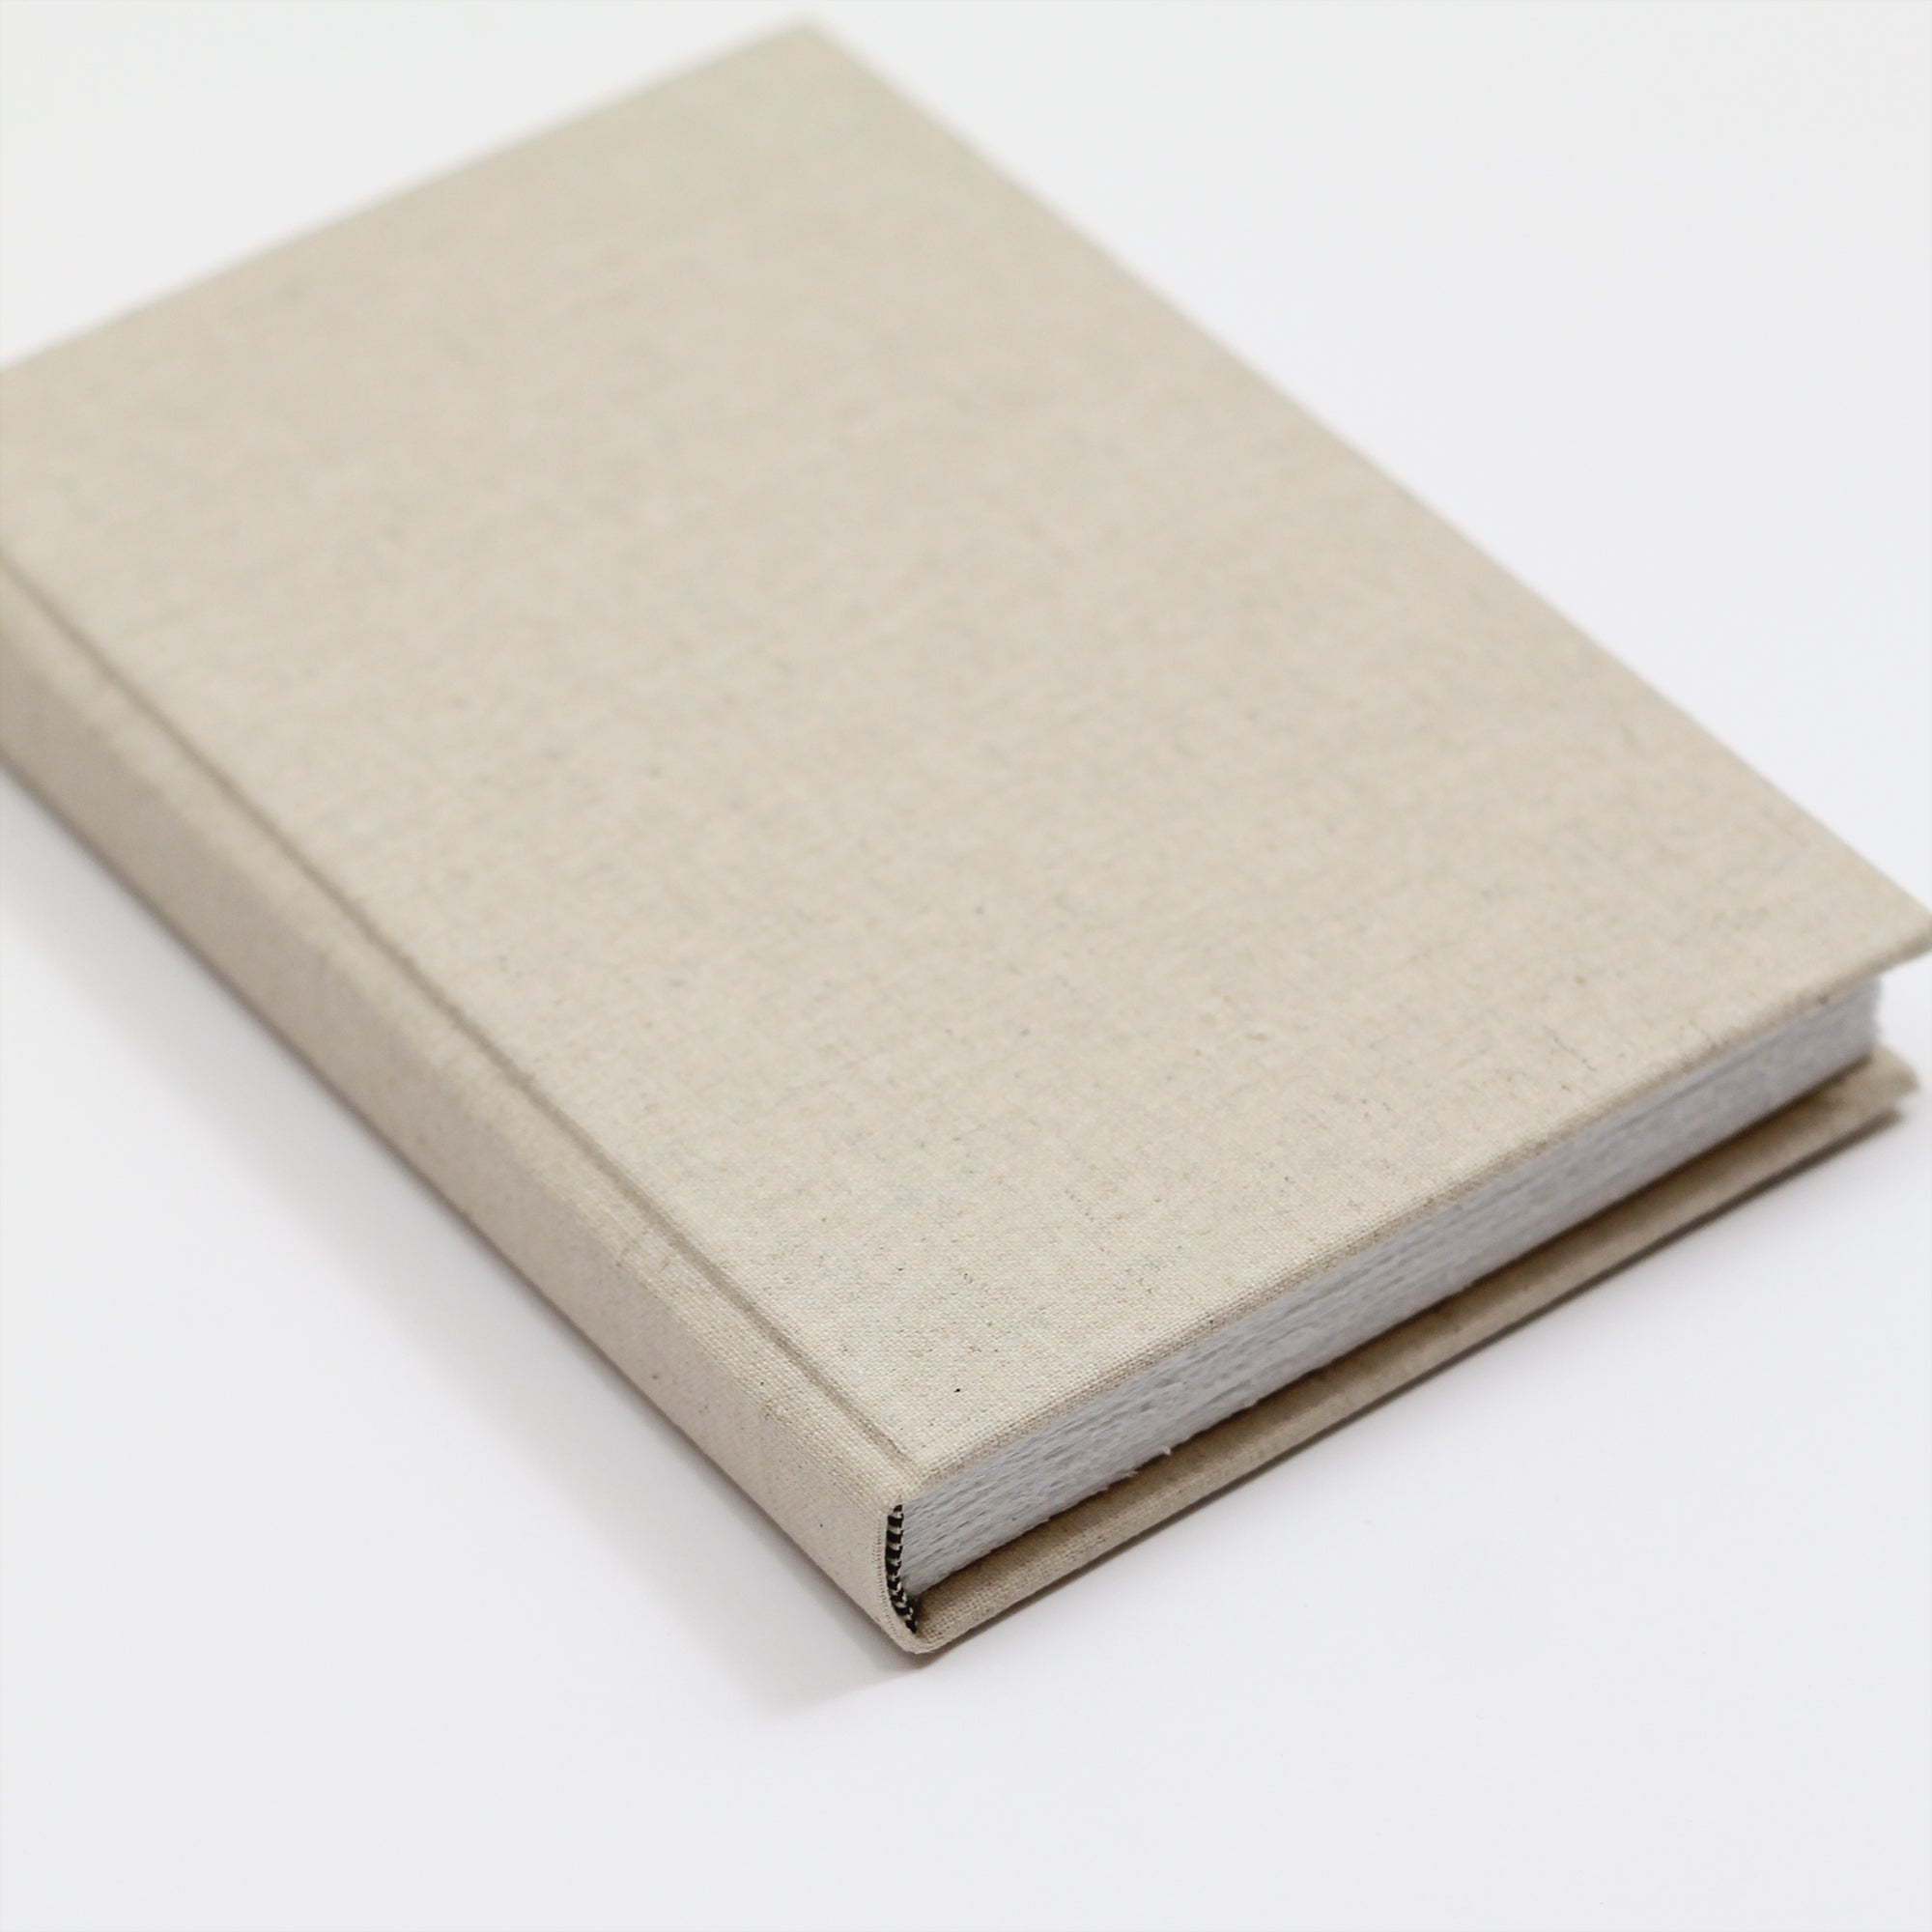 Medium 5.5x8.5 Blank Page Journal, Cover: Natural Linen